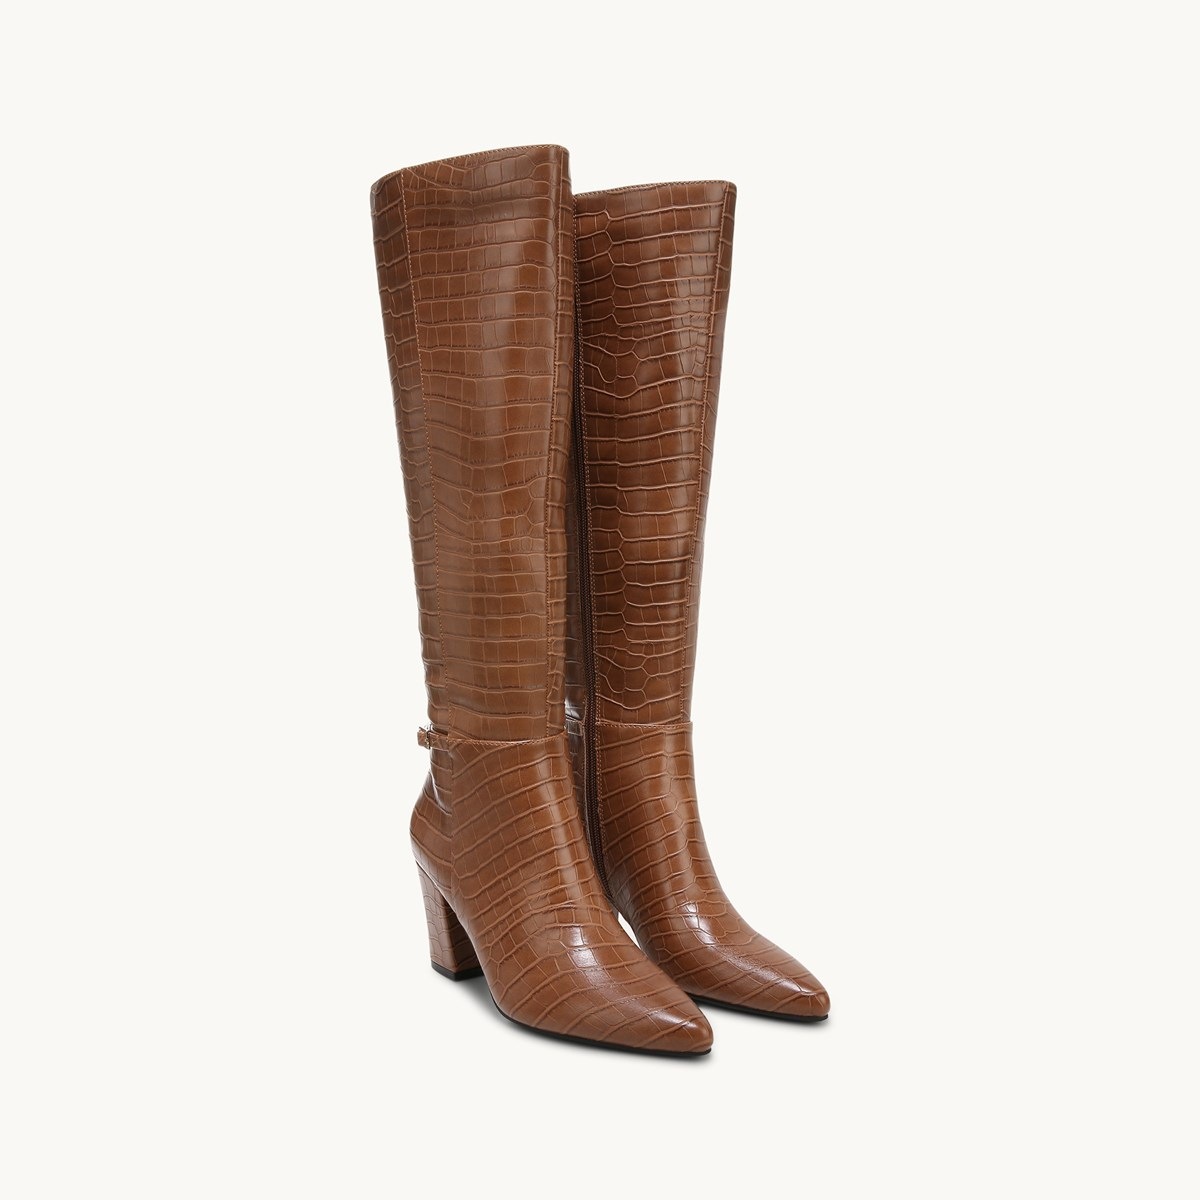 Stride in Elegance: Discovering Balmain's Knee High Boots